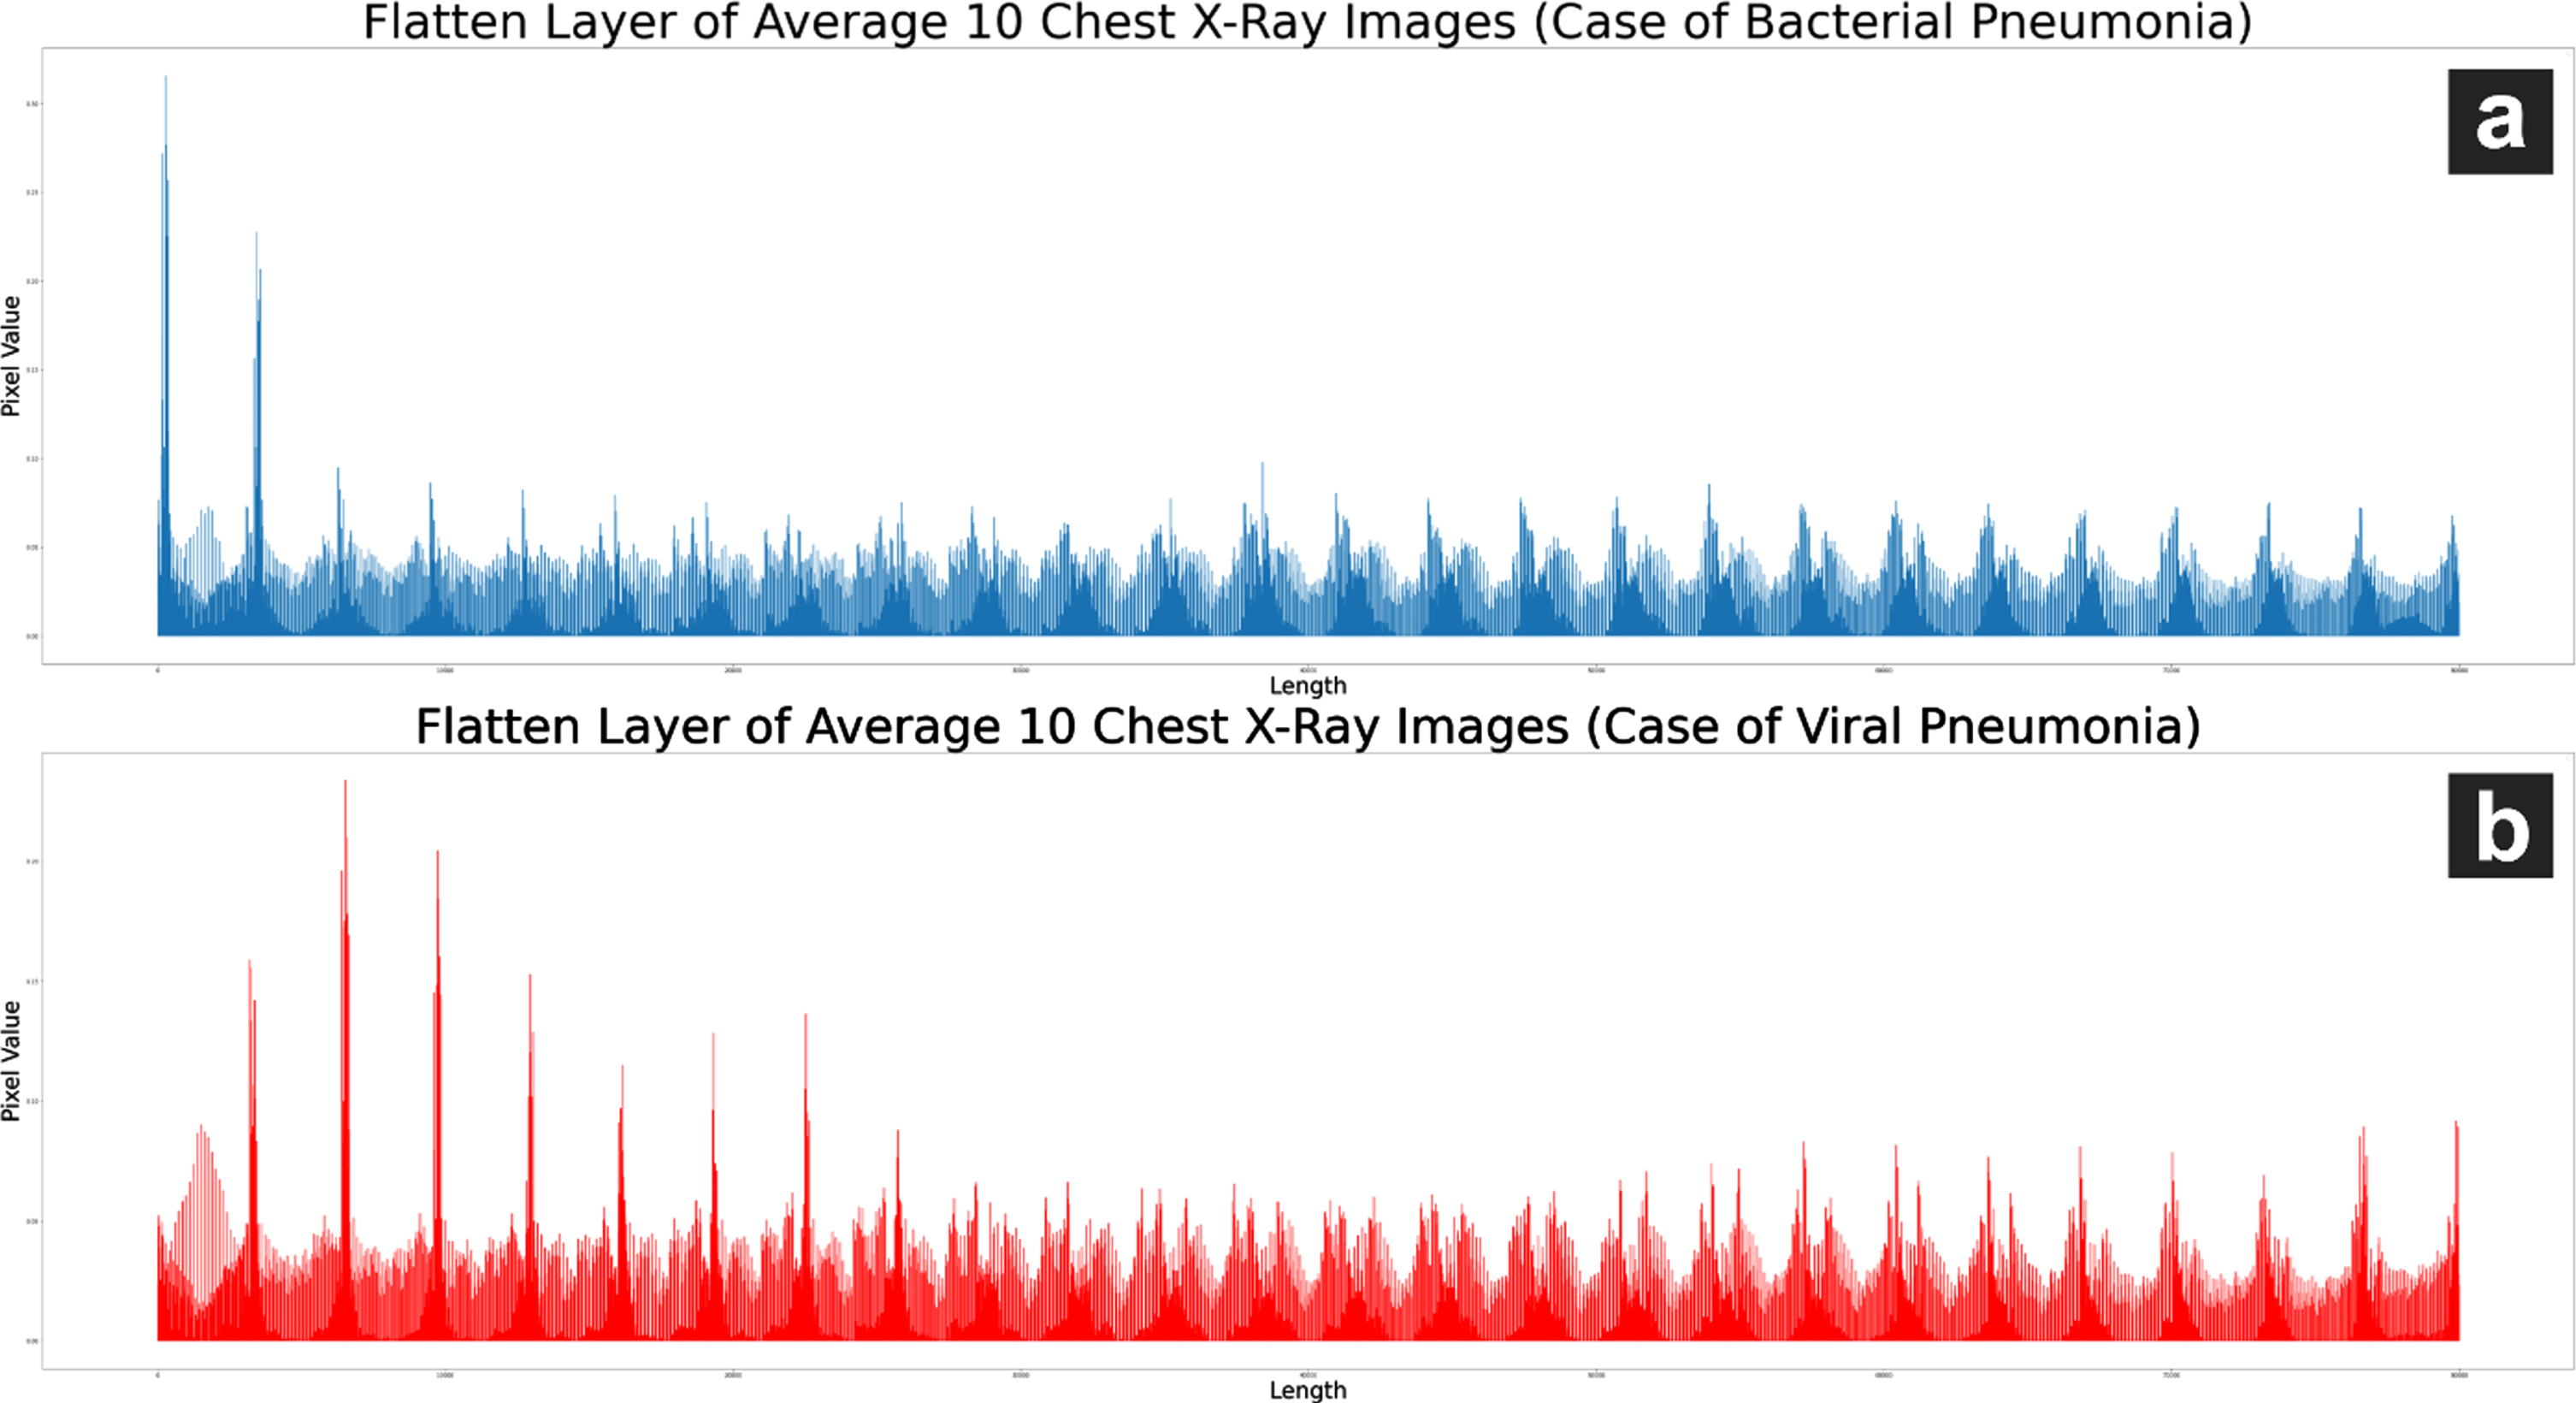 (a) Flatten layer graph of an average of 10 chest X-ray images of pneumonia (bacteria) and (b) an average of 10 chest X-ray images of pneumonia (non-COVID-19 virus).